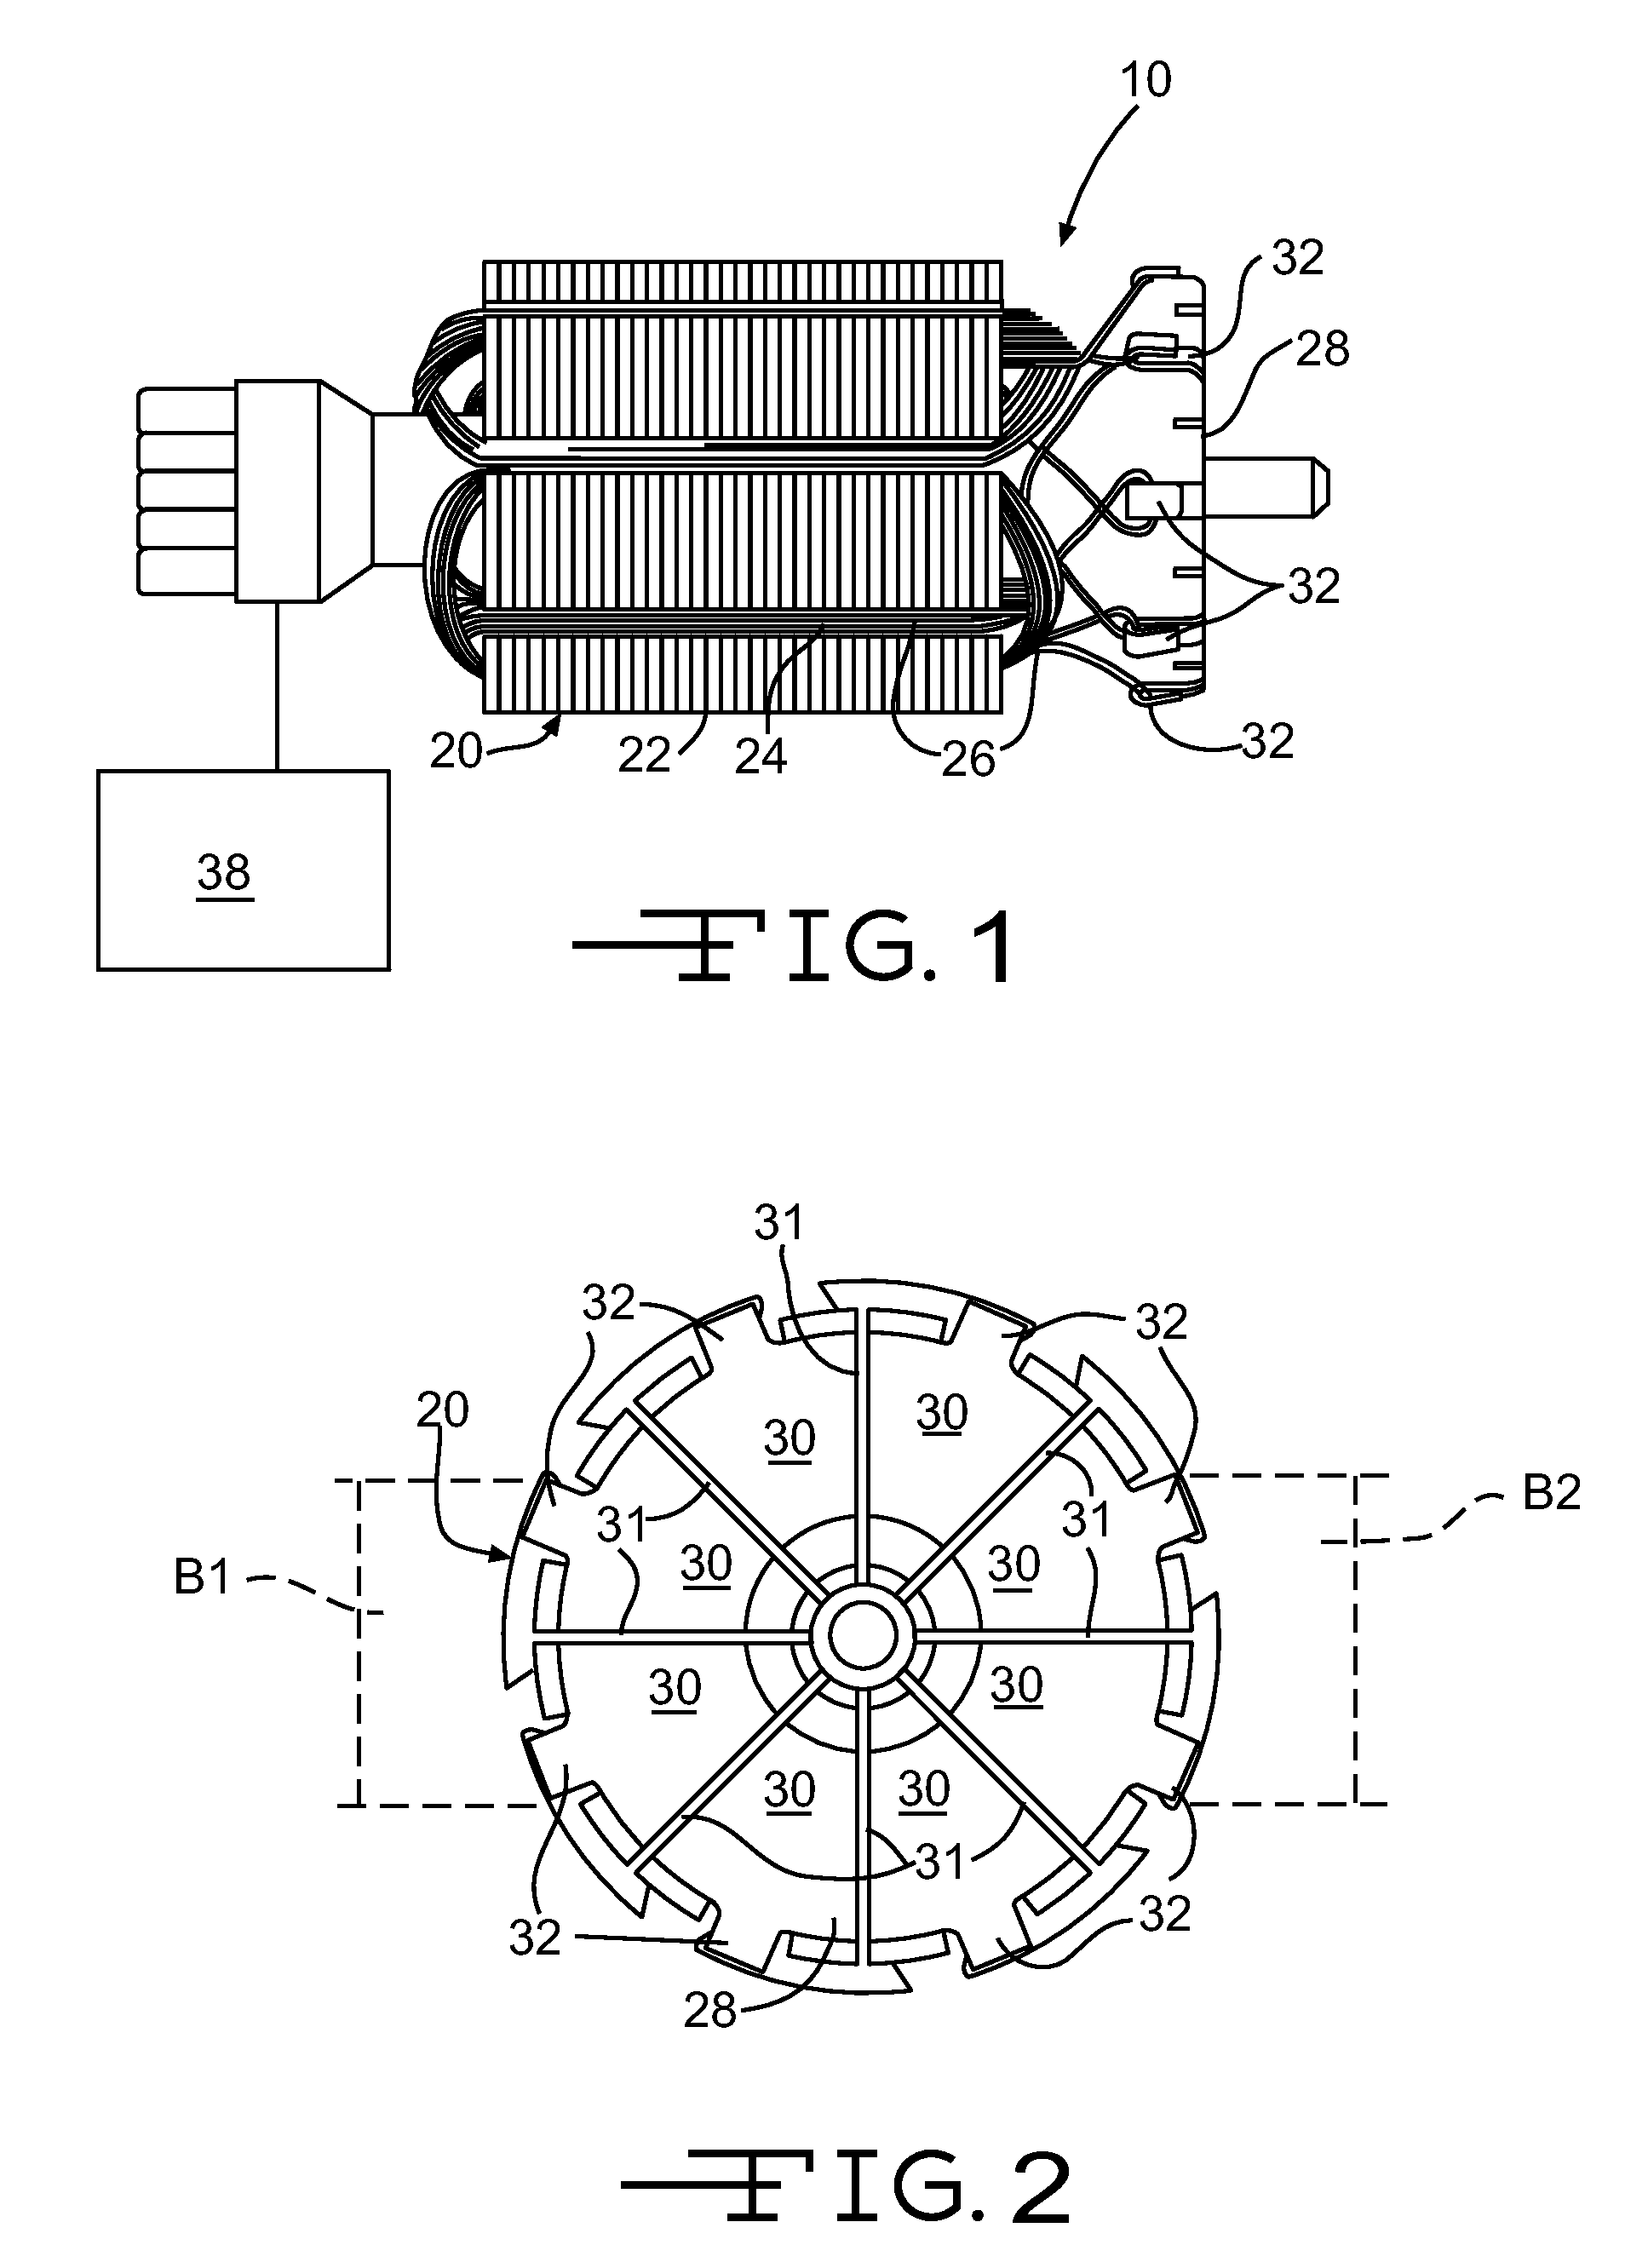 Method for Monitoring the Condition of a Commutator of an Electric Motor